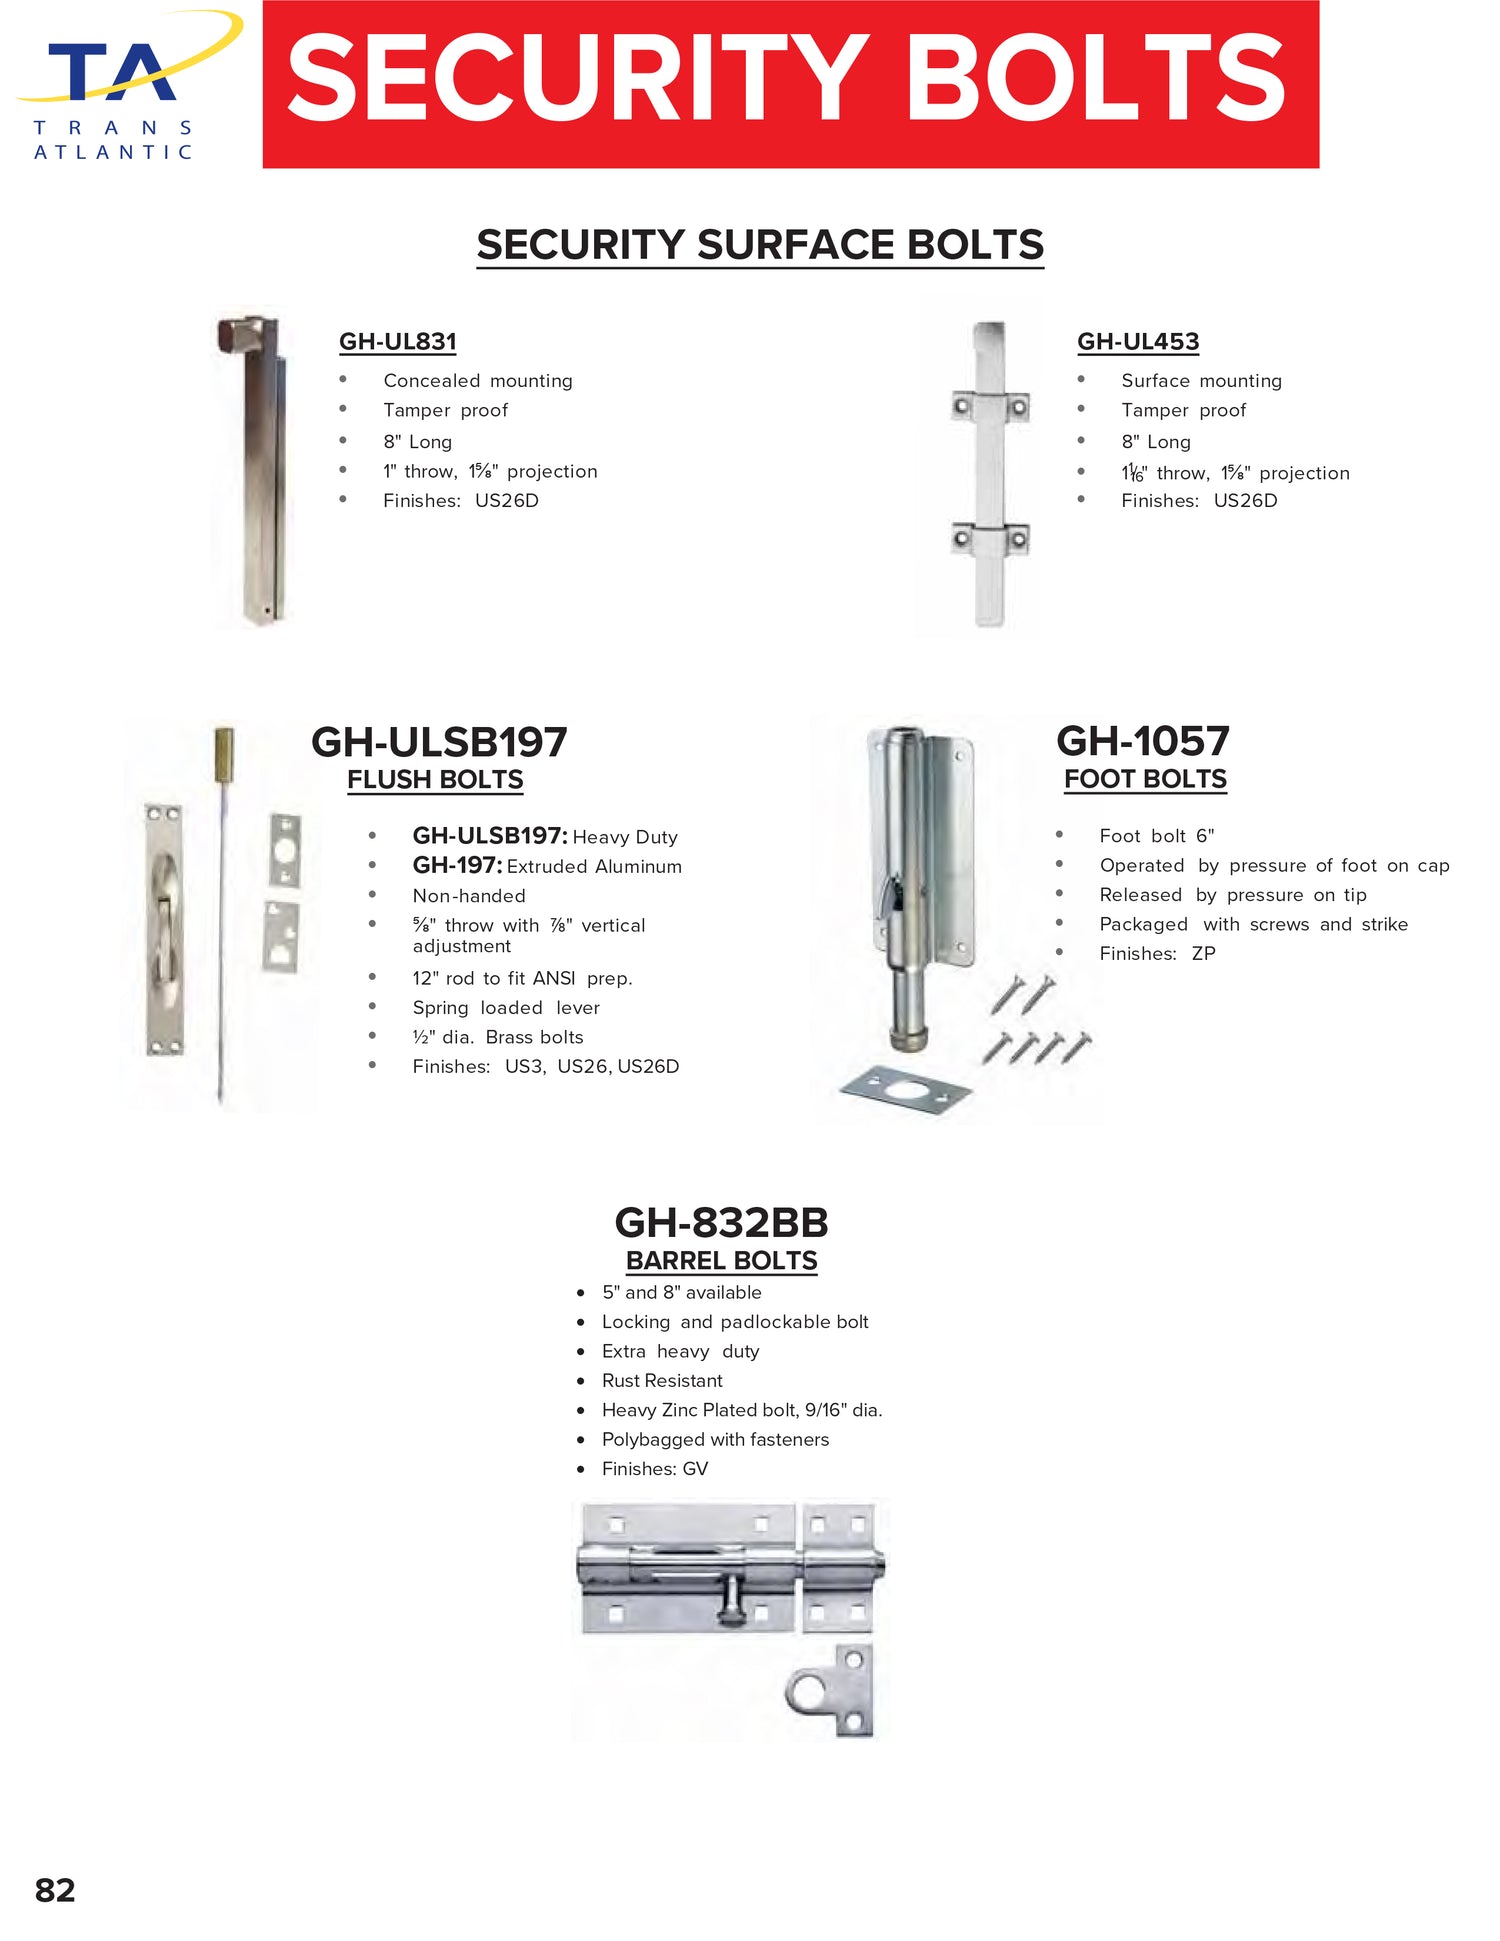 Ultra Secure Heavy Duty Barrel Surface Bolt - Optimum Security with Robust Design -  Pro-Edge HD